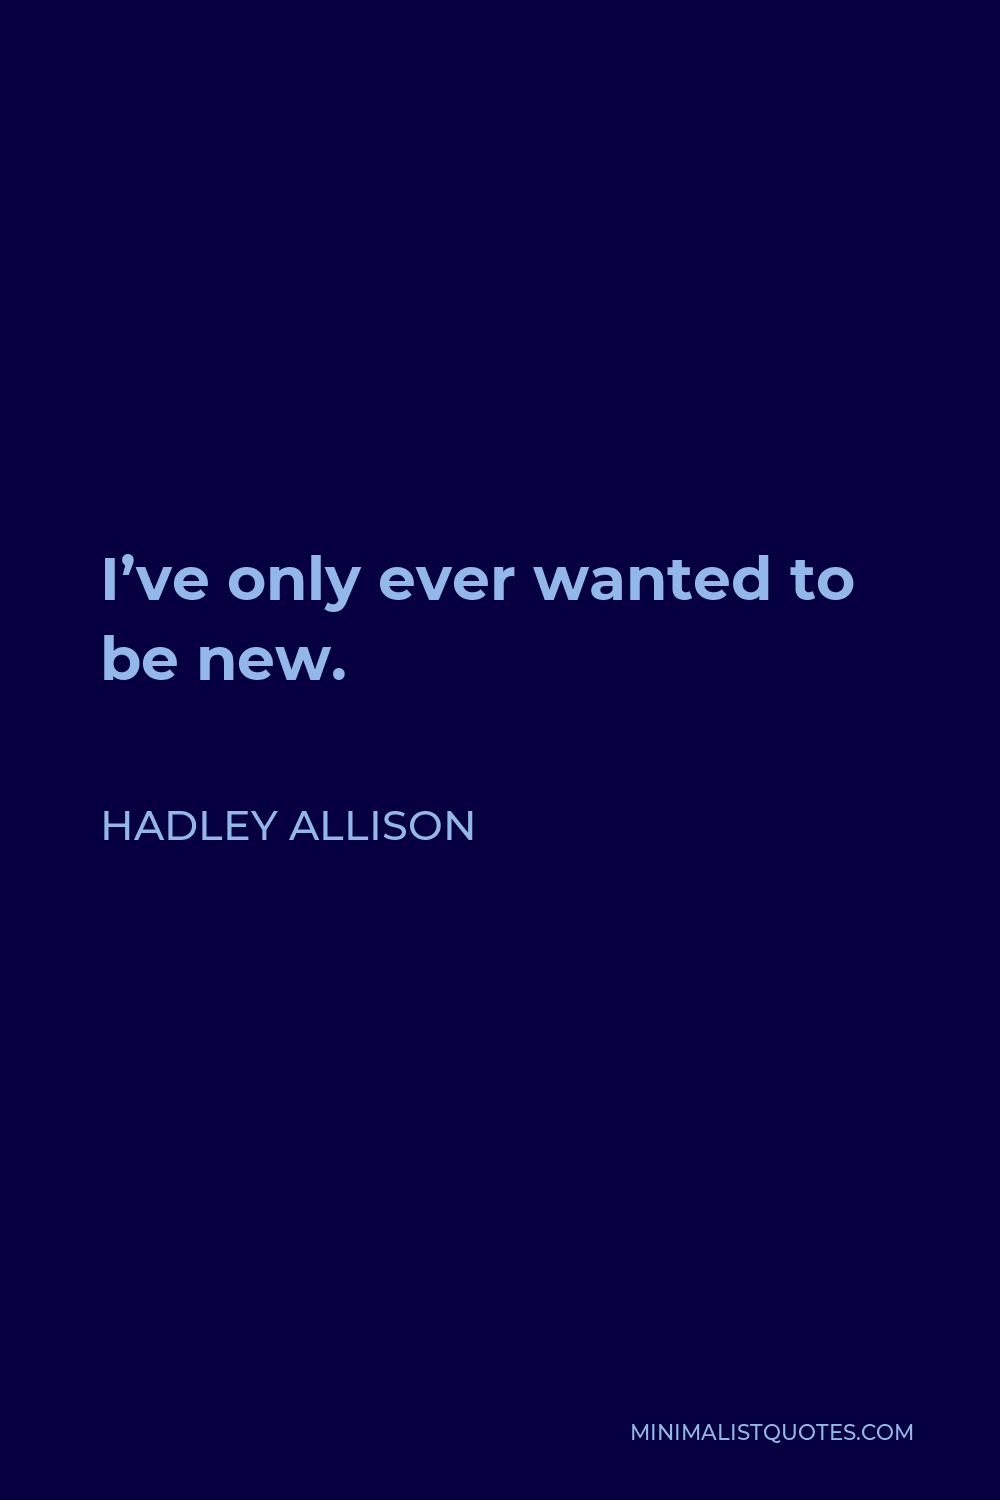 Hadley Allison Quote - I’ve only ever wanted to be new.